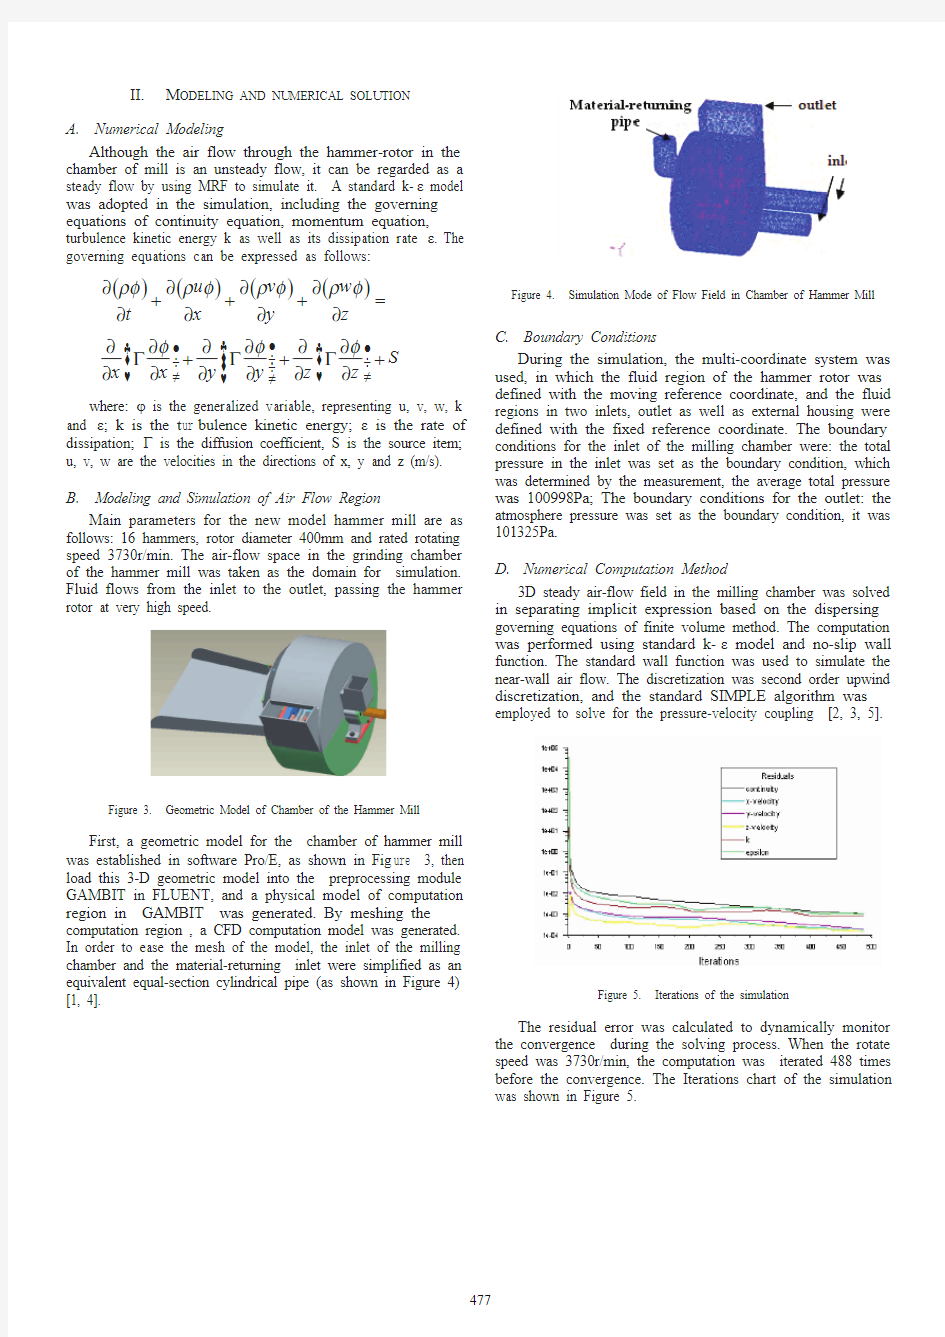 Numerical simulation on air-flow field in the millingchamber of hammer mill